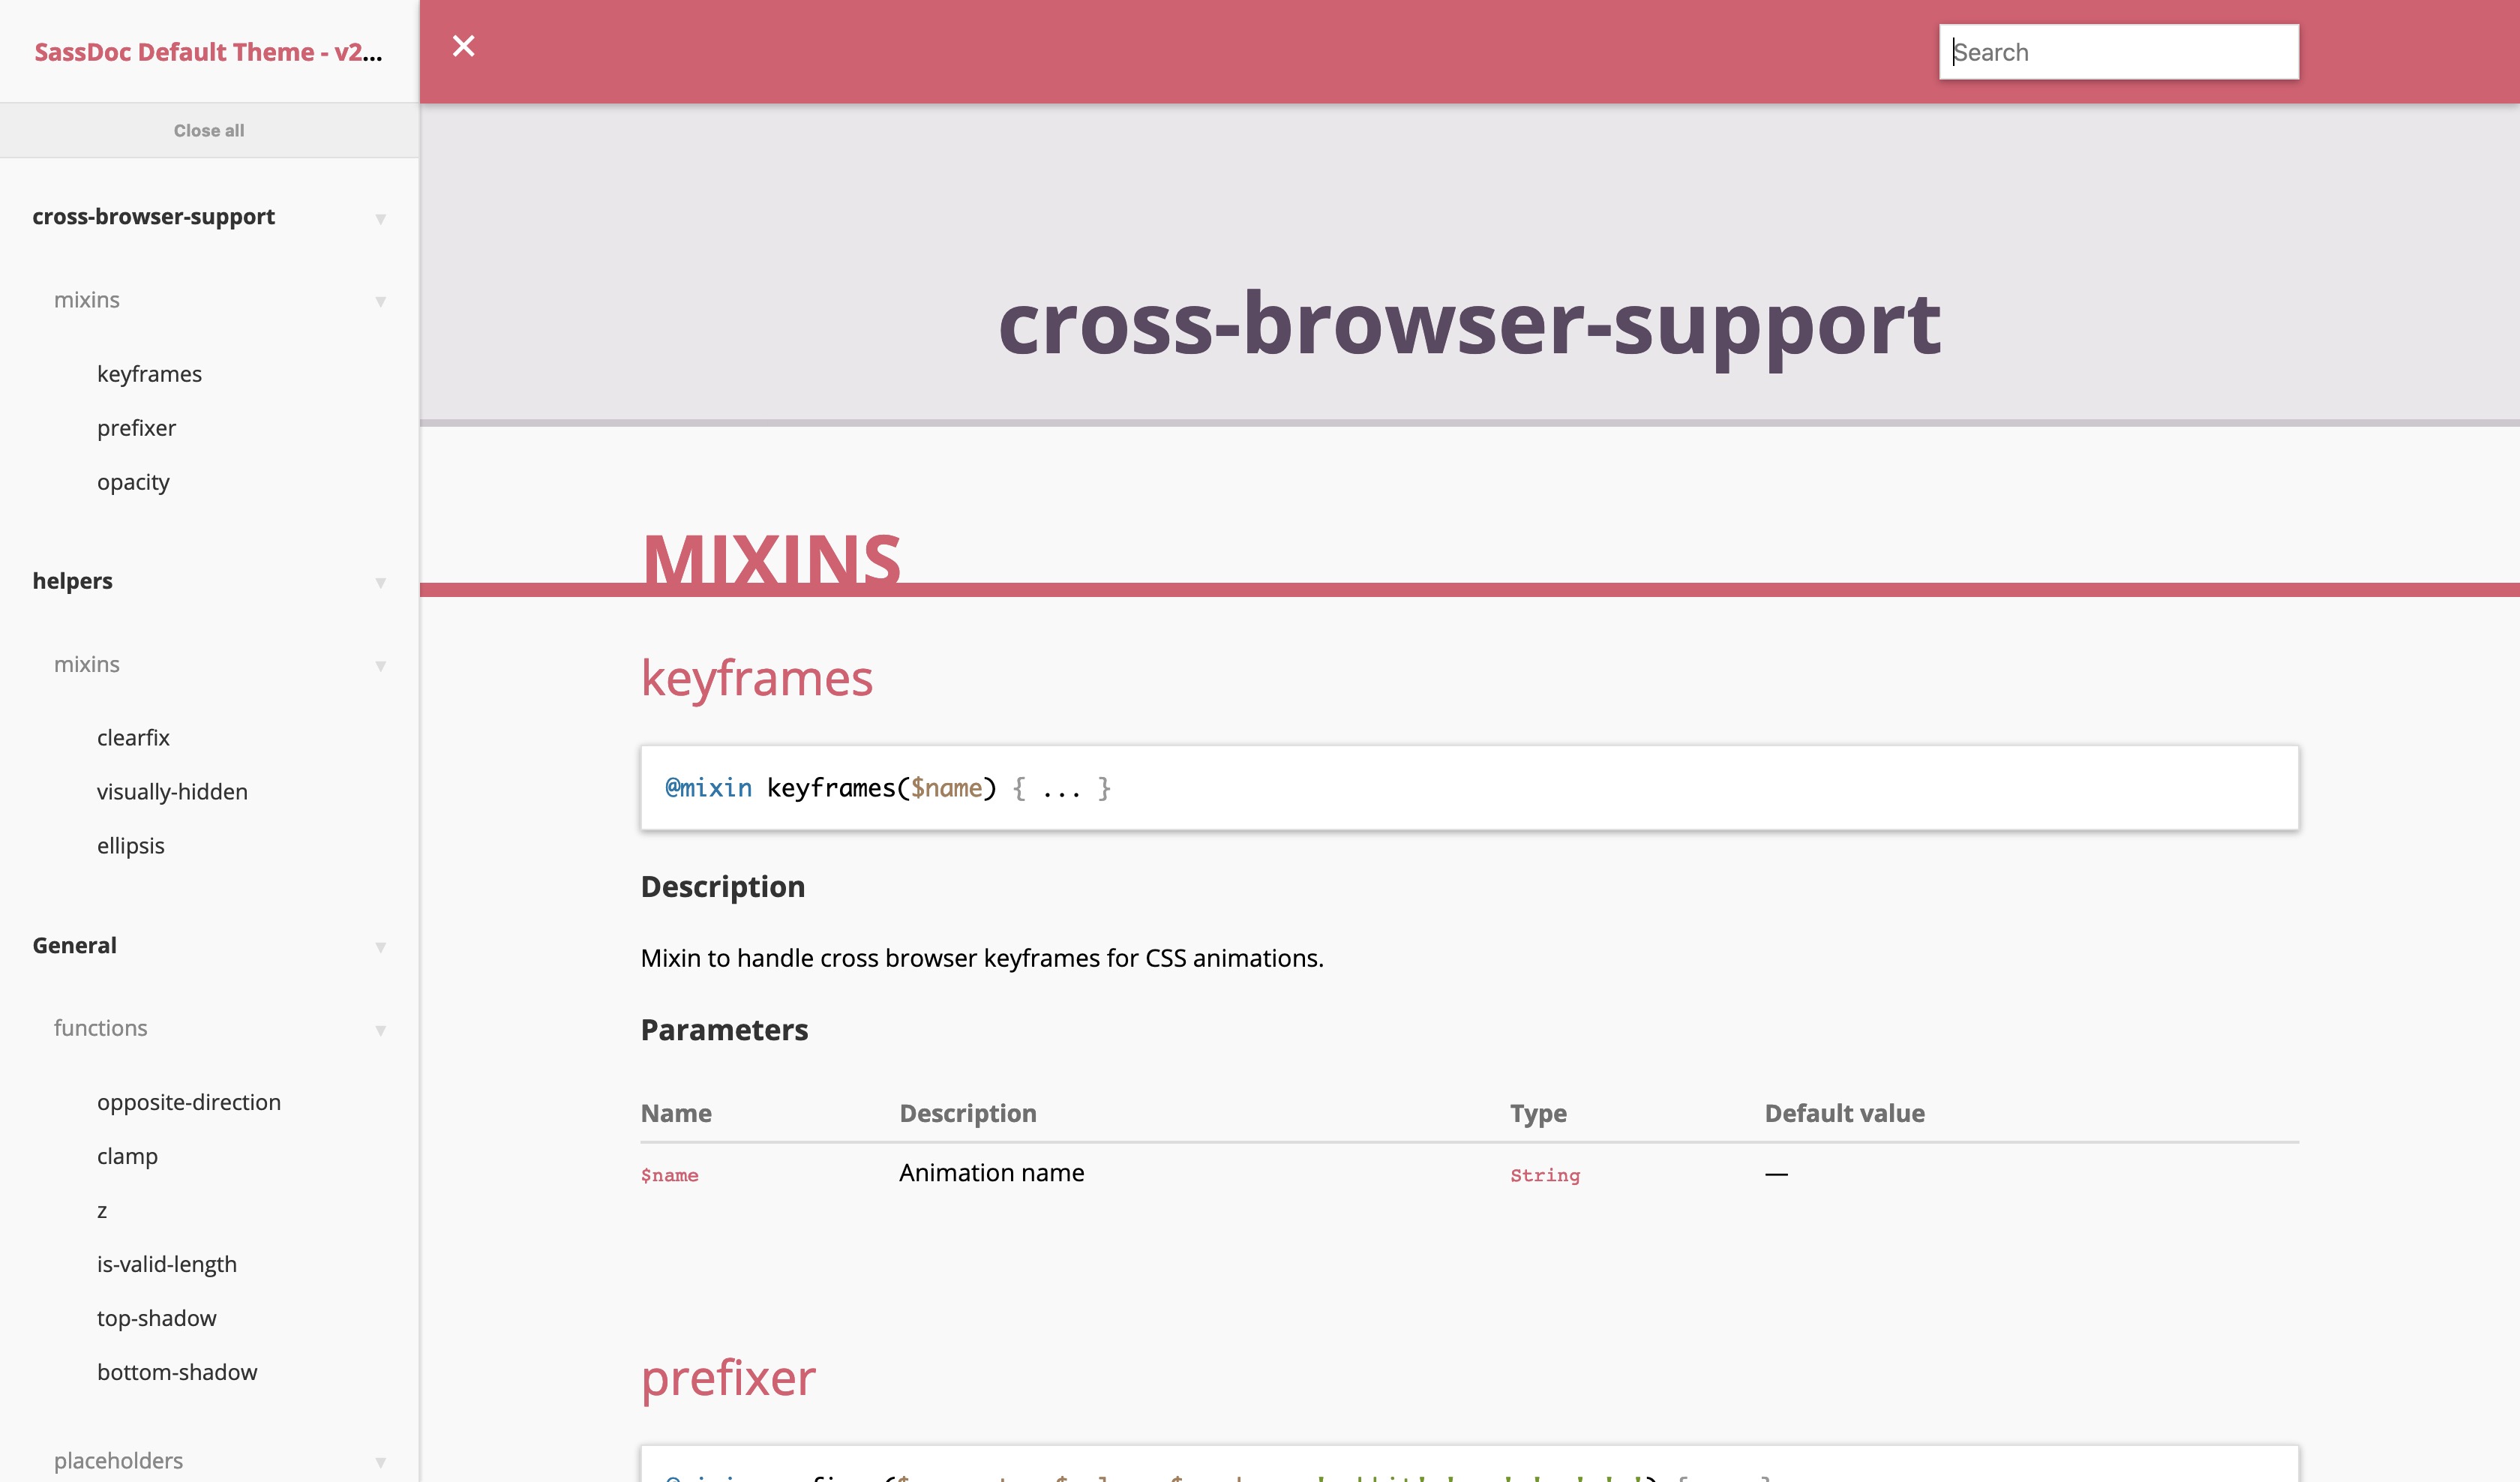 Generated site, showing mixins and functions